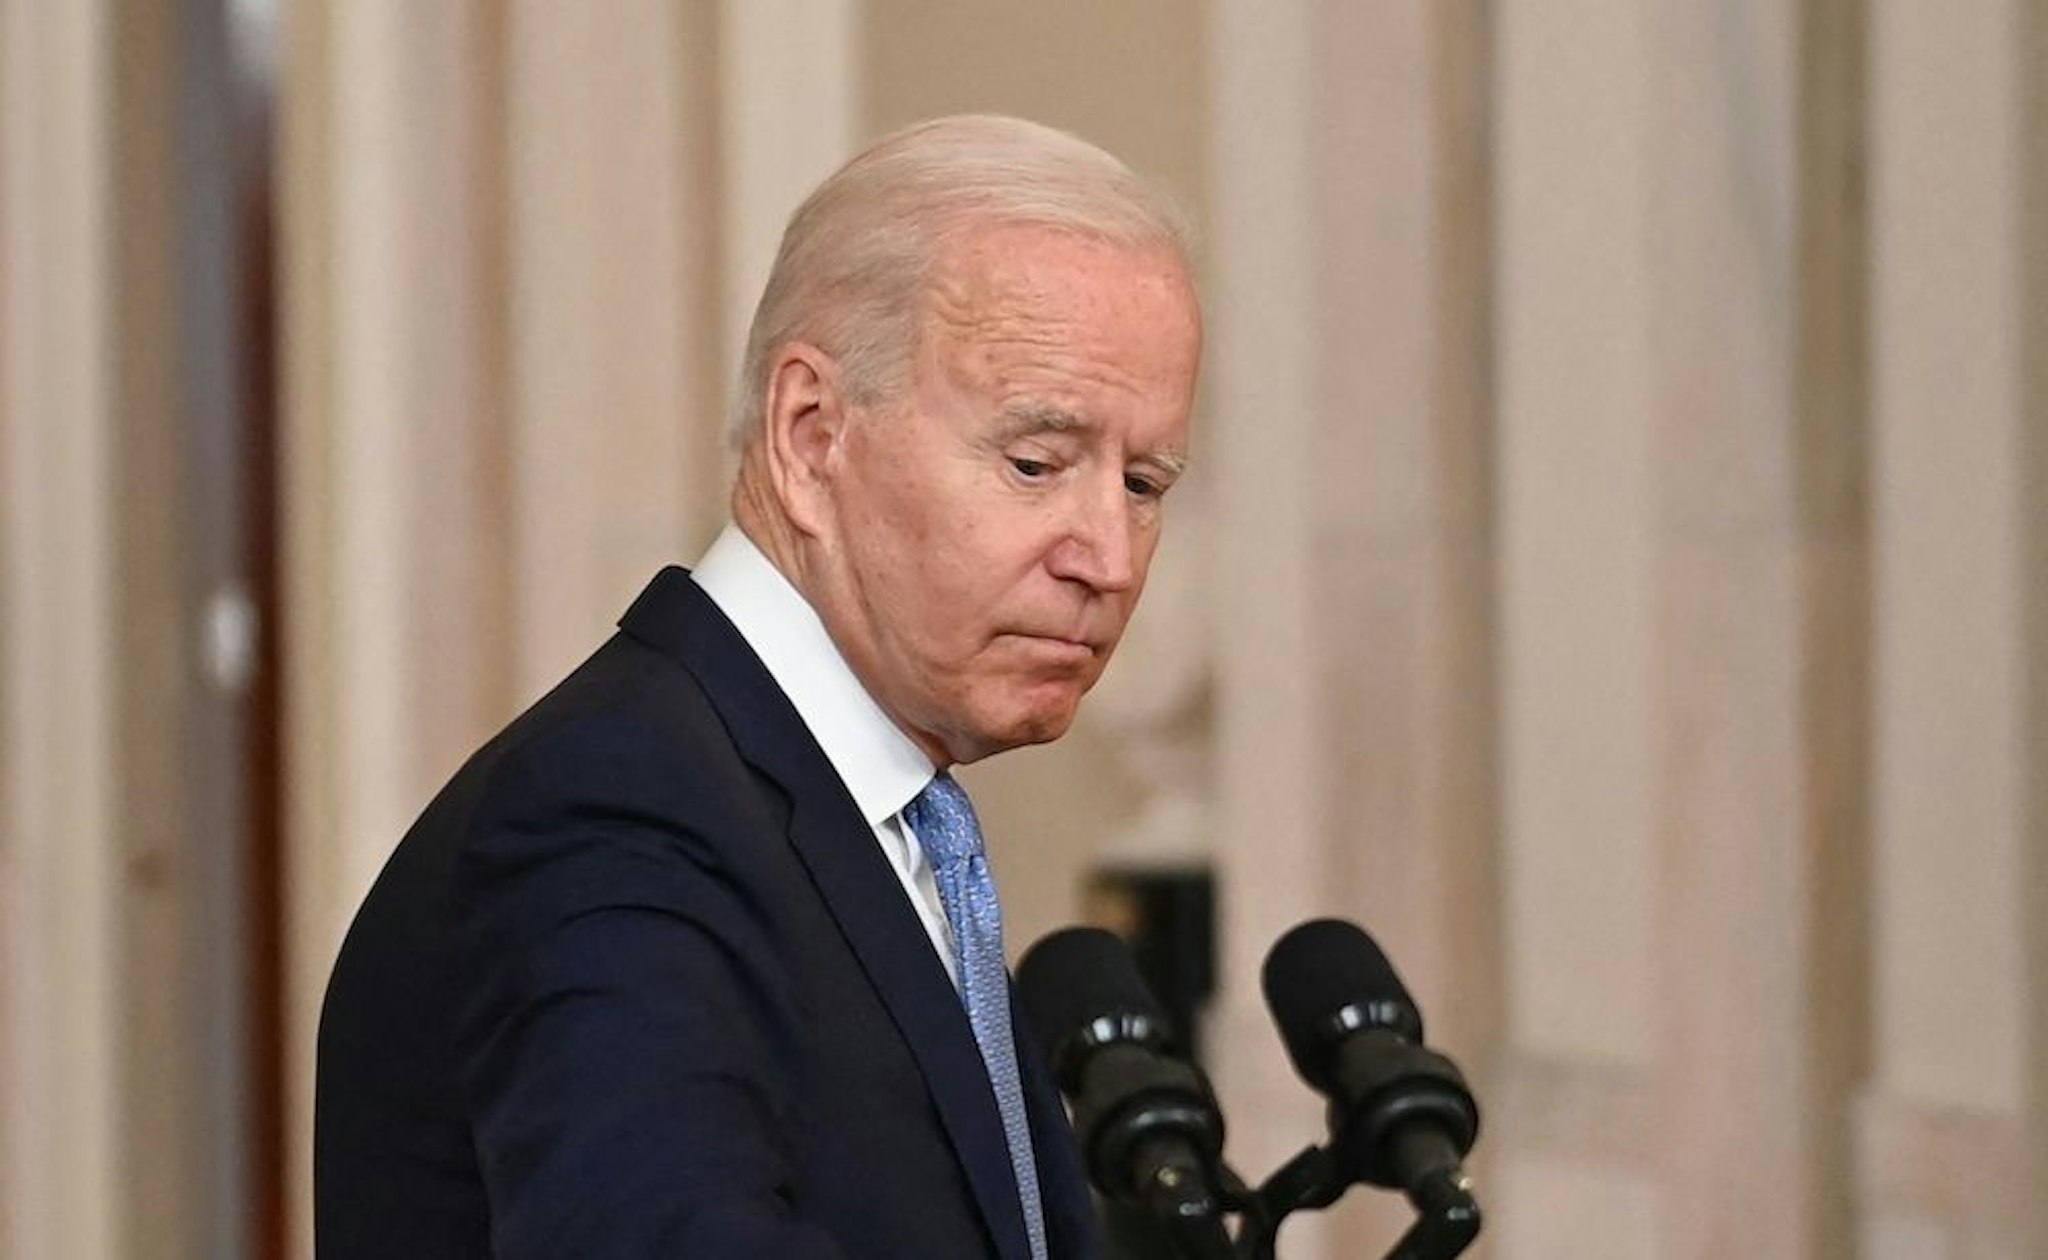 US President Joe Biden looks back after speaking on ending the war in Afghanistan in the State Dining Room at the White House in Washington, DC, on August 31, 2021. - US President Joe Biden is addressing the nation on the US exit from Afghanistan after a failed 20 year war that he'd vowed to end but whose chaotic last days are now overshadowing his presidency. (Photo by Brendan SMIALOWSKI / AFP) (Photo by BRENDAN SMIALOWSKI/AFP via Getty Images)